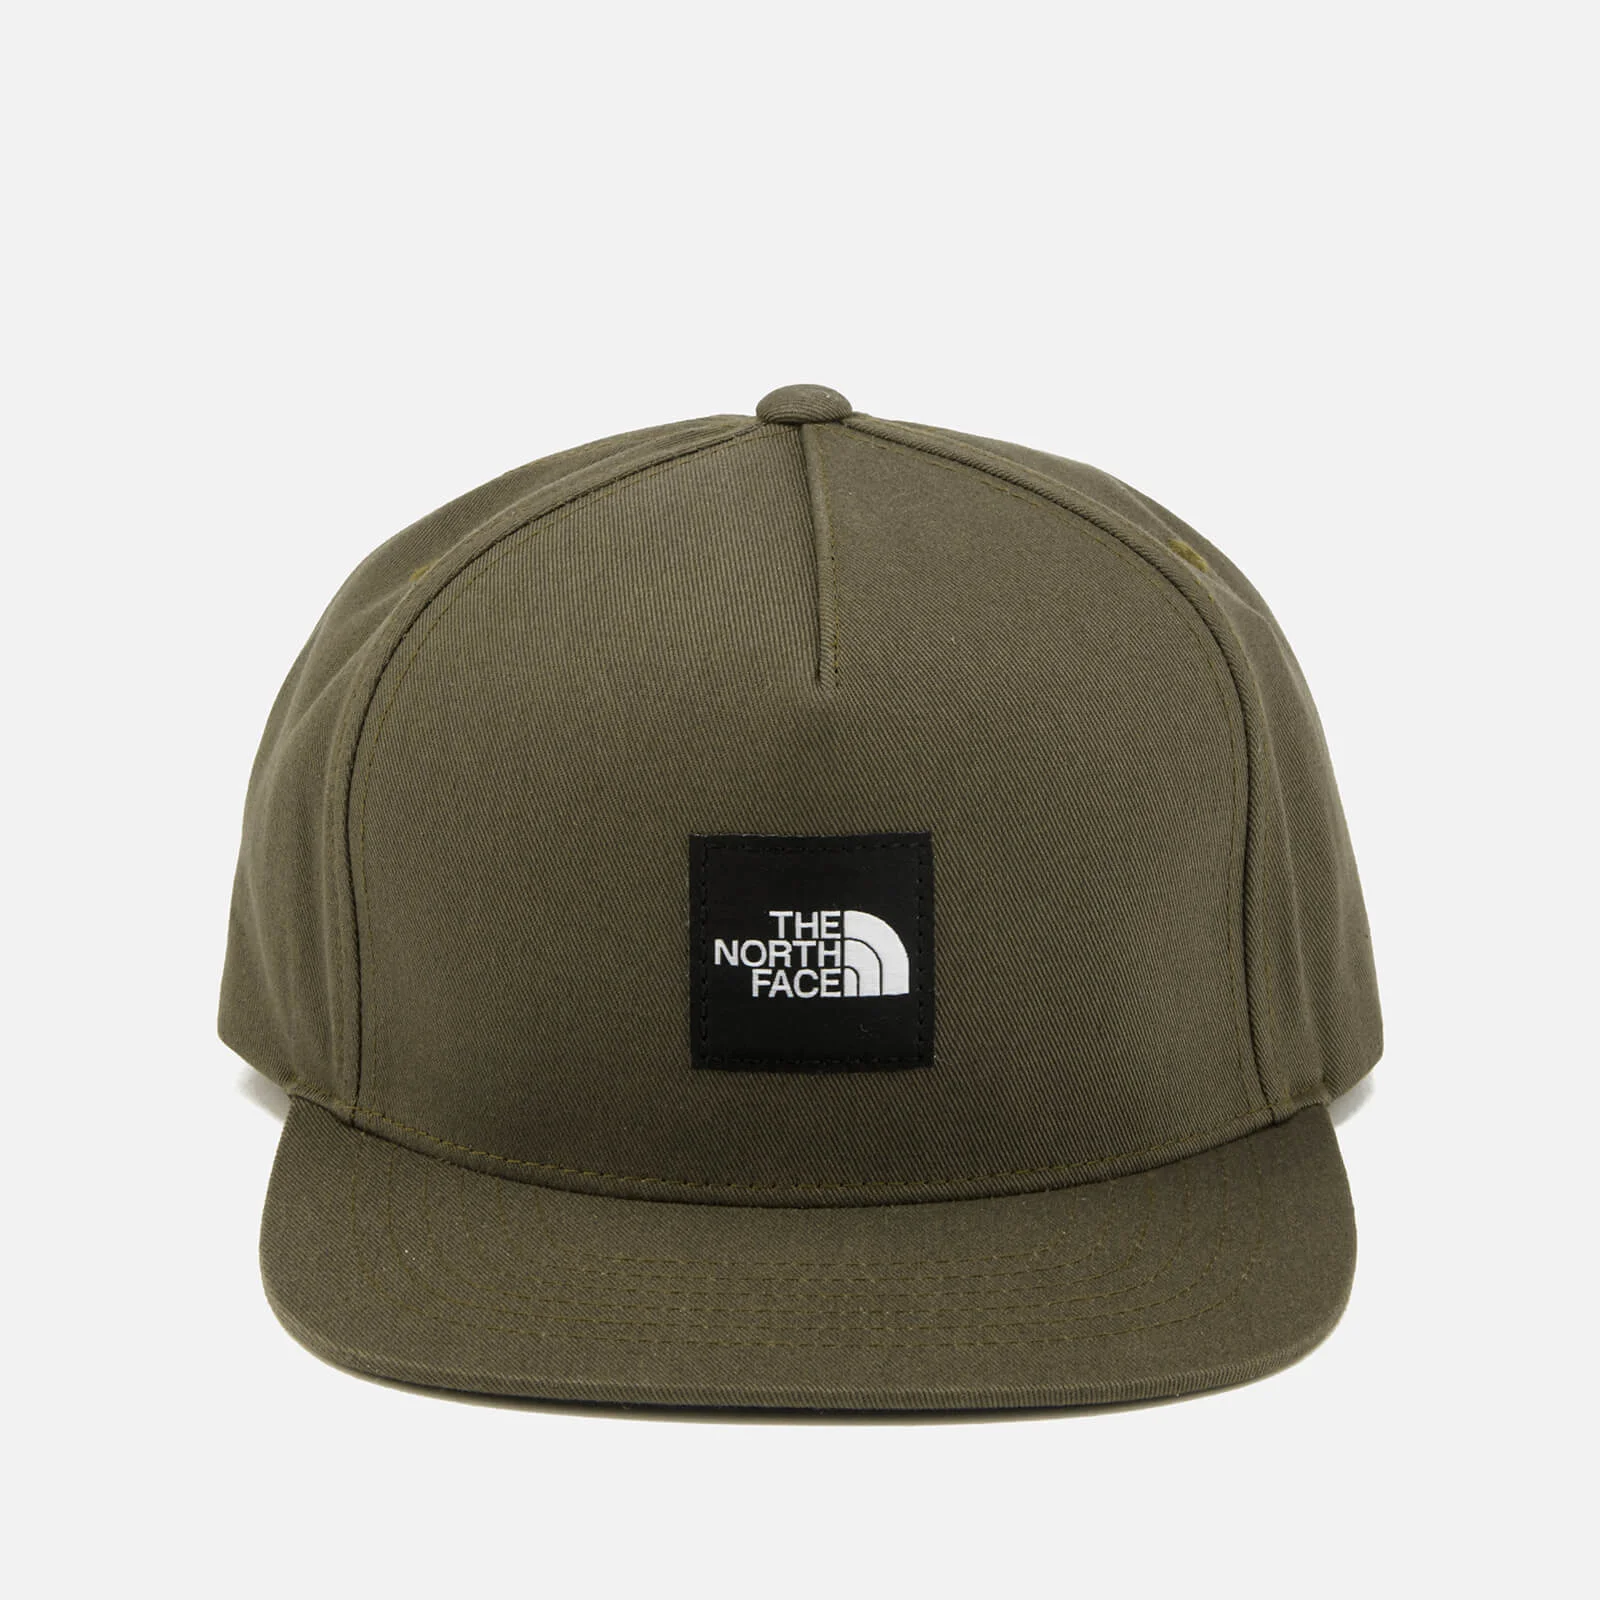 The North Face Men's Street Ball Cap - New Taupe Green Image 1